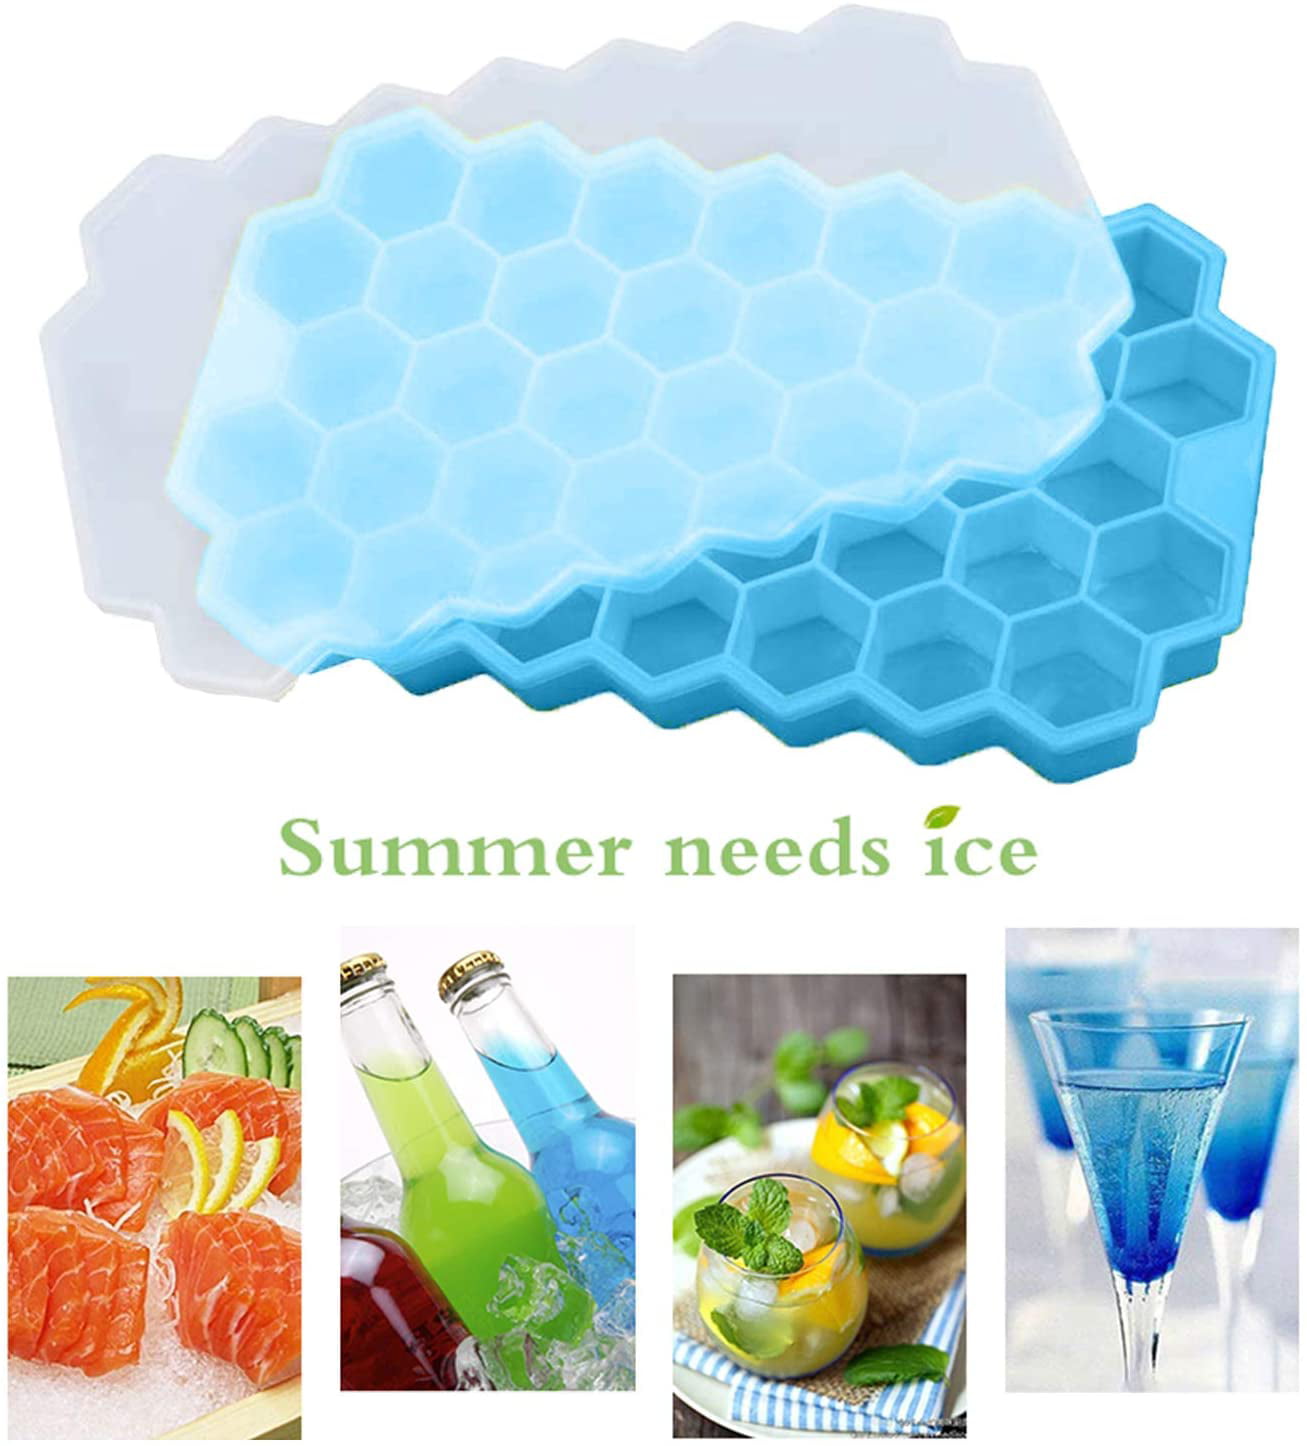 Flexible,Stackable Ice Cube Tray with Lids Civaza 2 Pack Ice Trays Ice Cube Trays Silicone ice tray for Whiskey and Cocktail blue+green BPA Free 